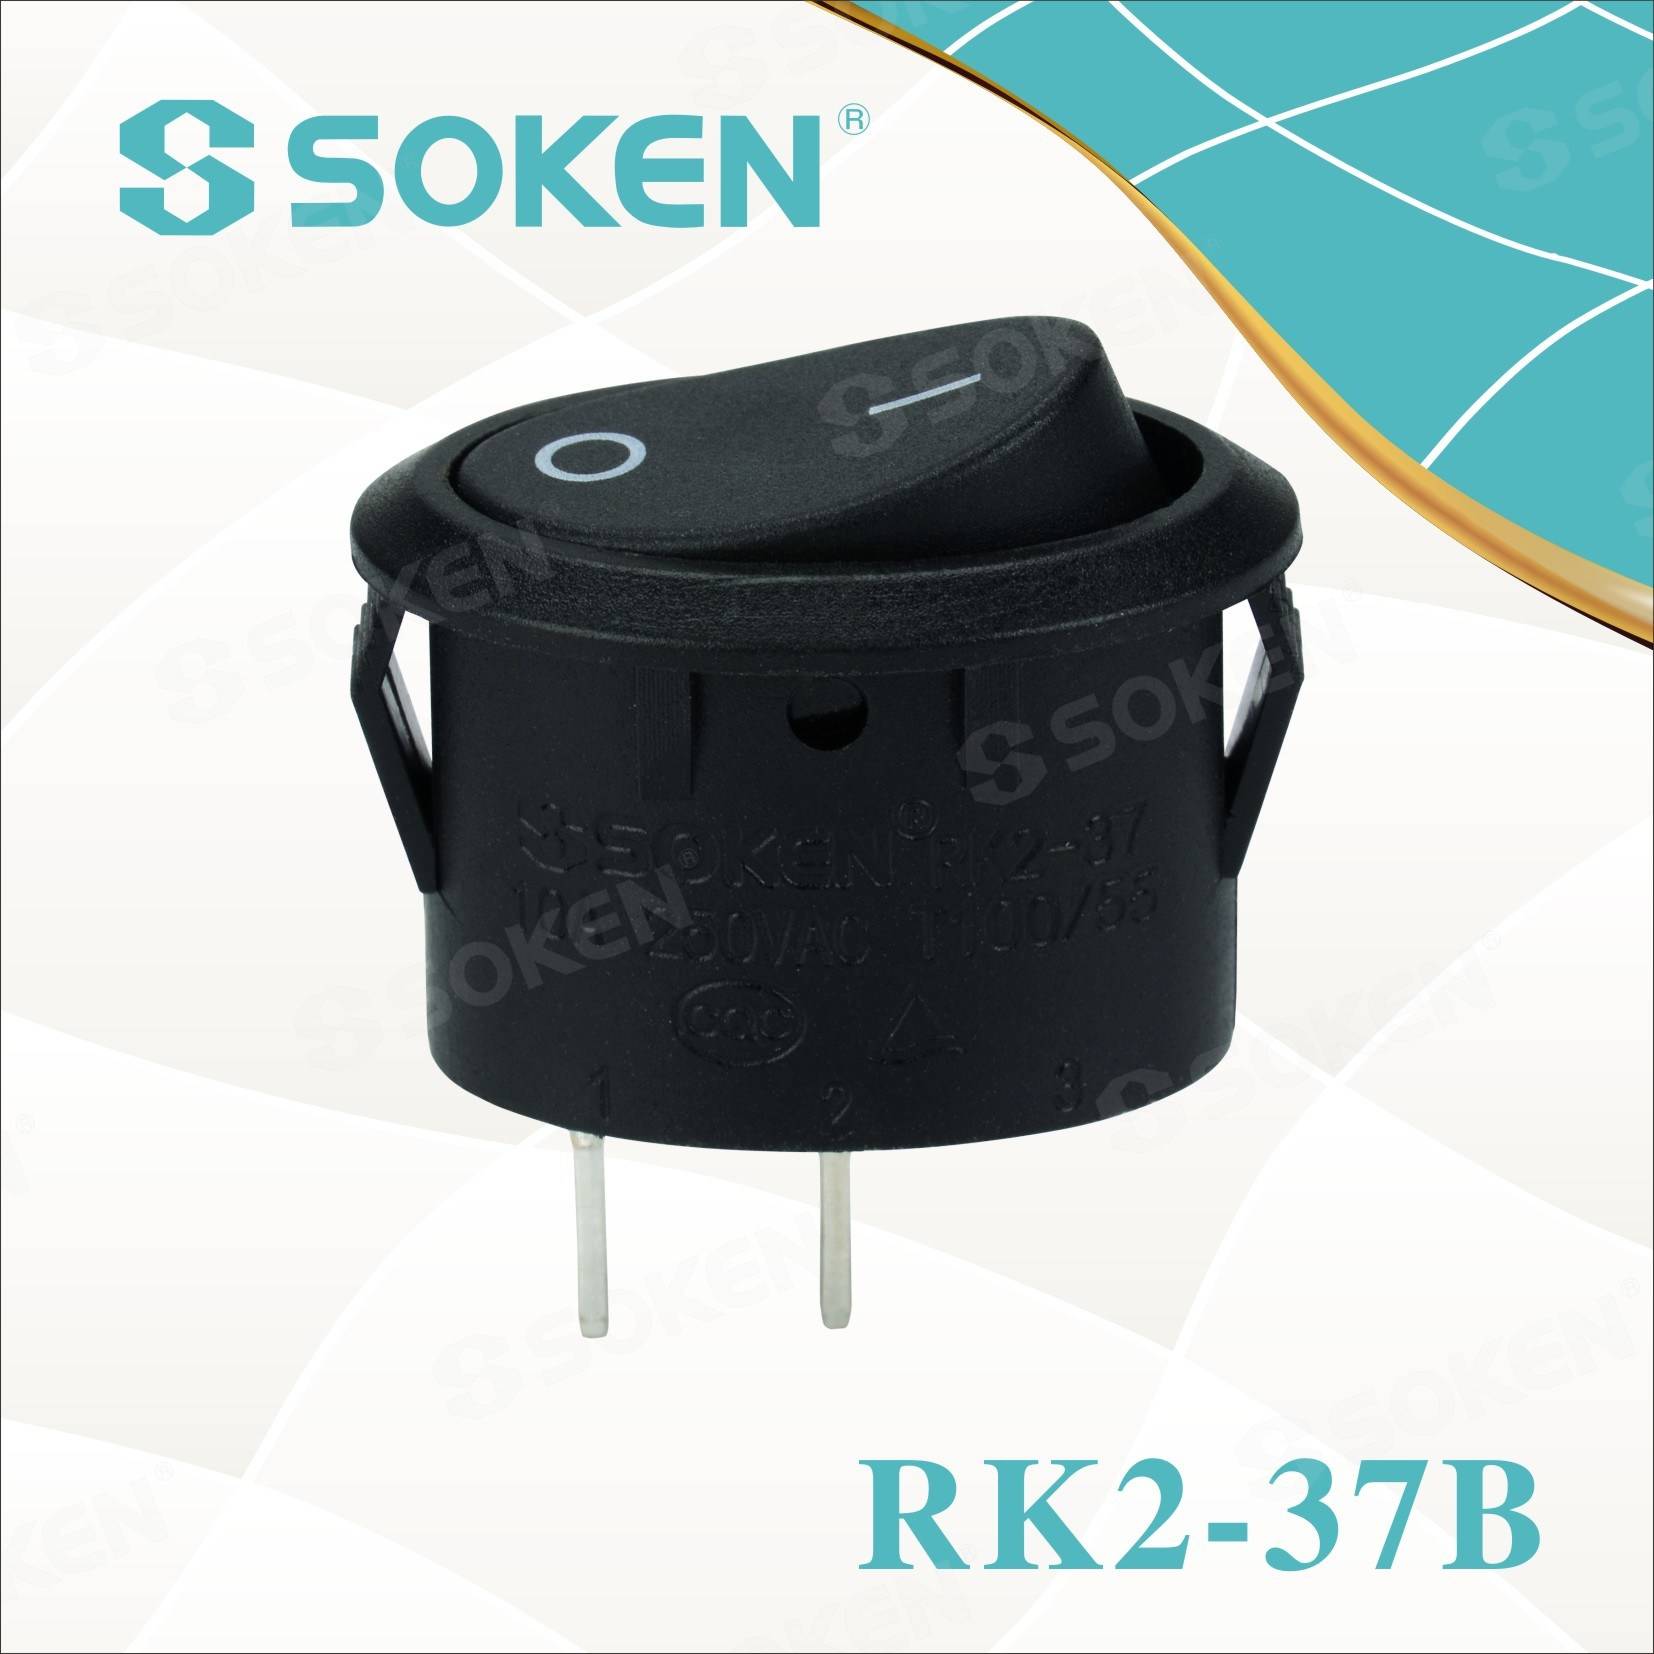 2018 High quality 10 Position Rotary Switch -
 Soken Rk2-37b Rocker Switch – Master Soken Electrical